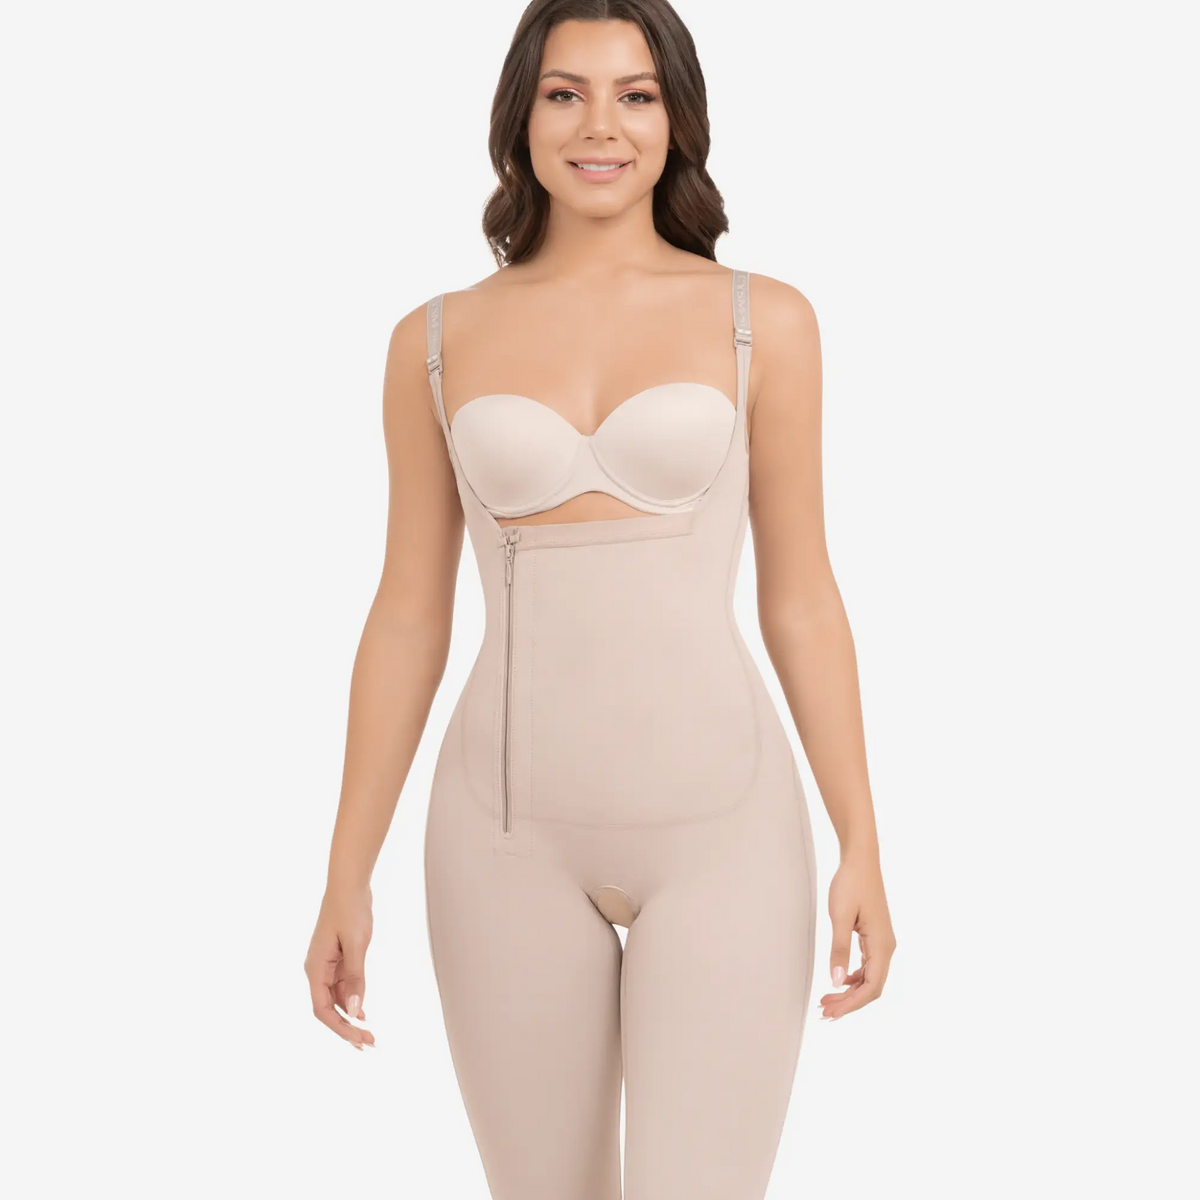 Icah Online Shop - Apricot Floral Lace Splice Tummy Control Shapewear  ₱99.00 Last piece size 2xl Transform your figure and enjoy wearing those  clothes you've always longed to wear as these Floral